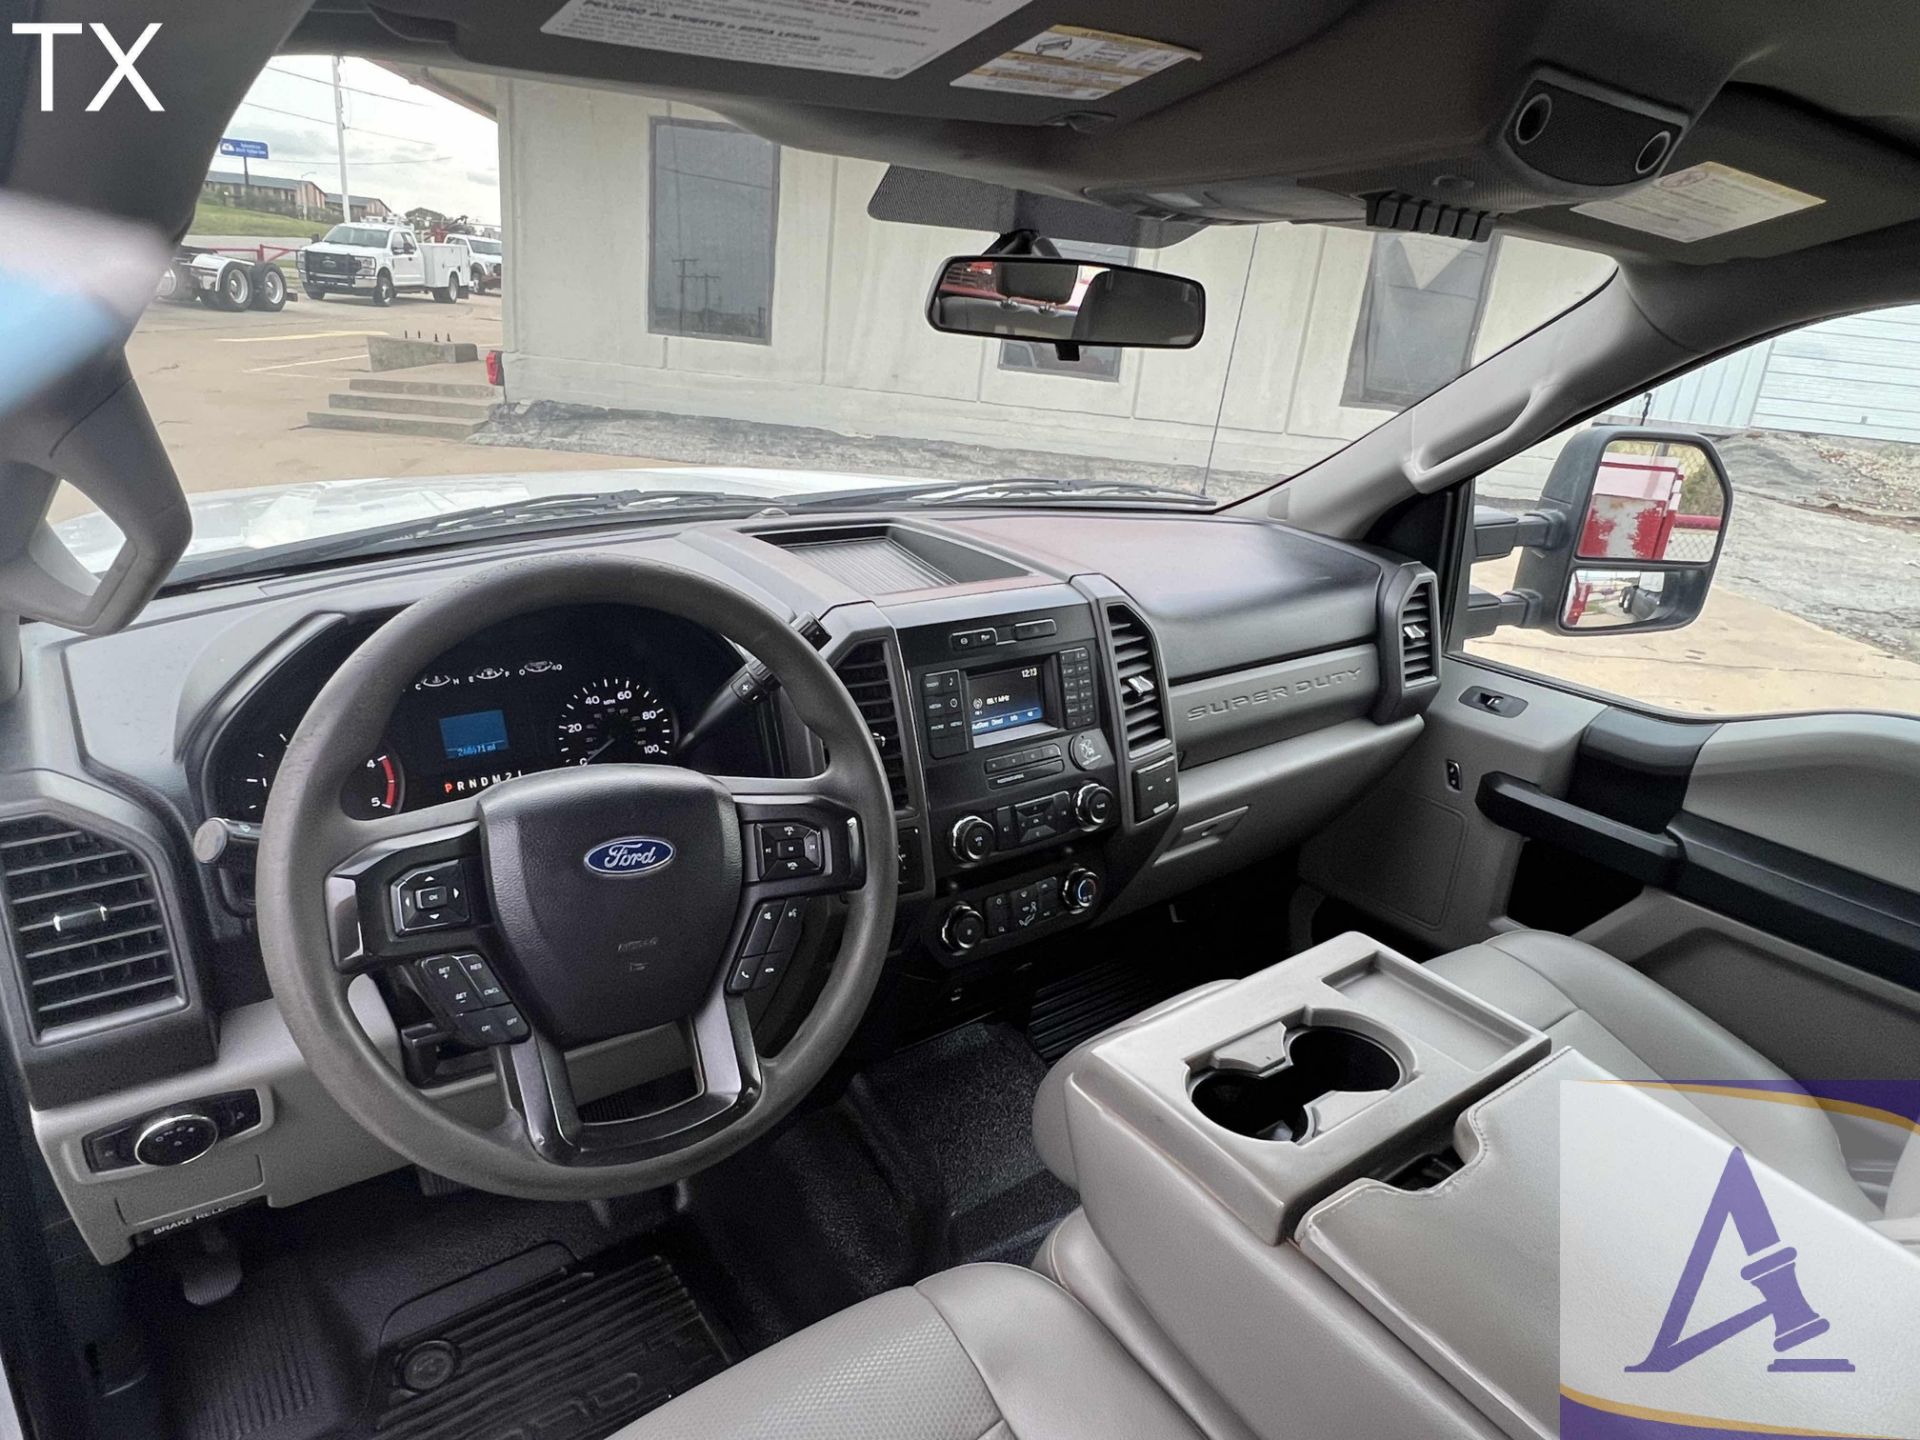 2019 Ford F550 4x4 Crew Cab Fuel Truck, Ingersoll-Rand Air Compressor, Toolboxes! - Image 12 of 20